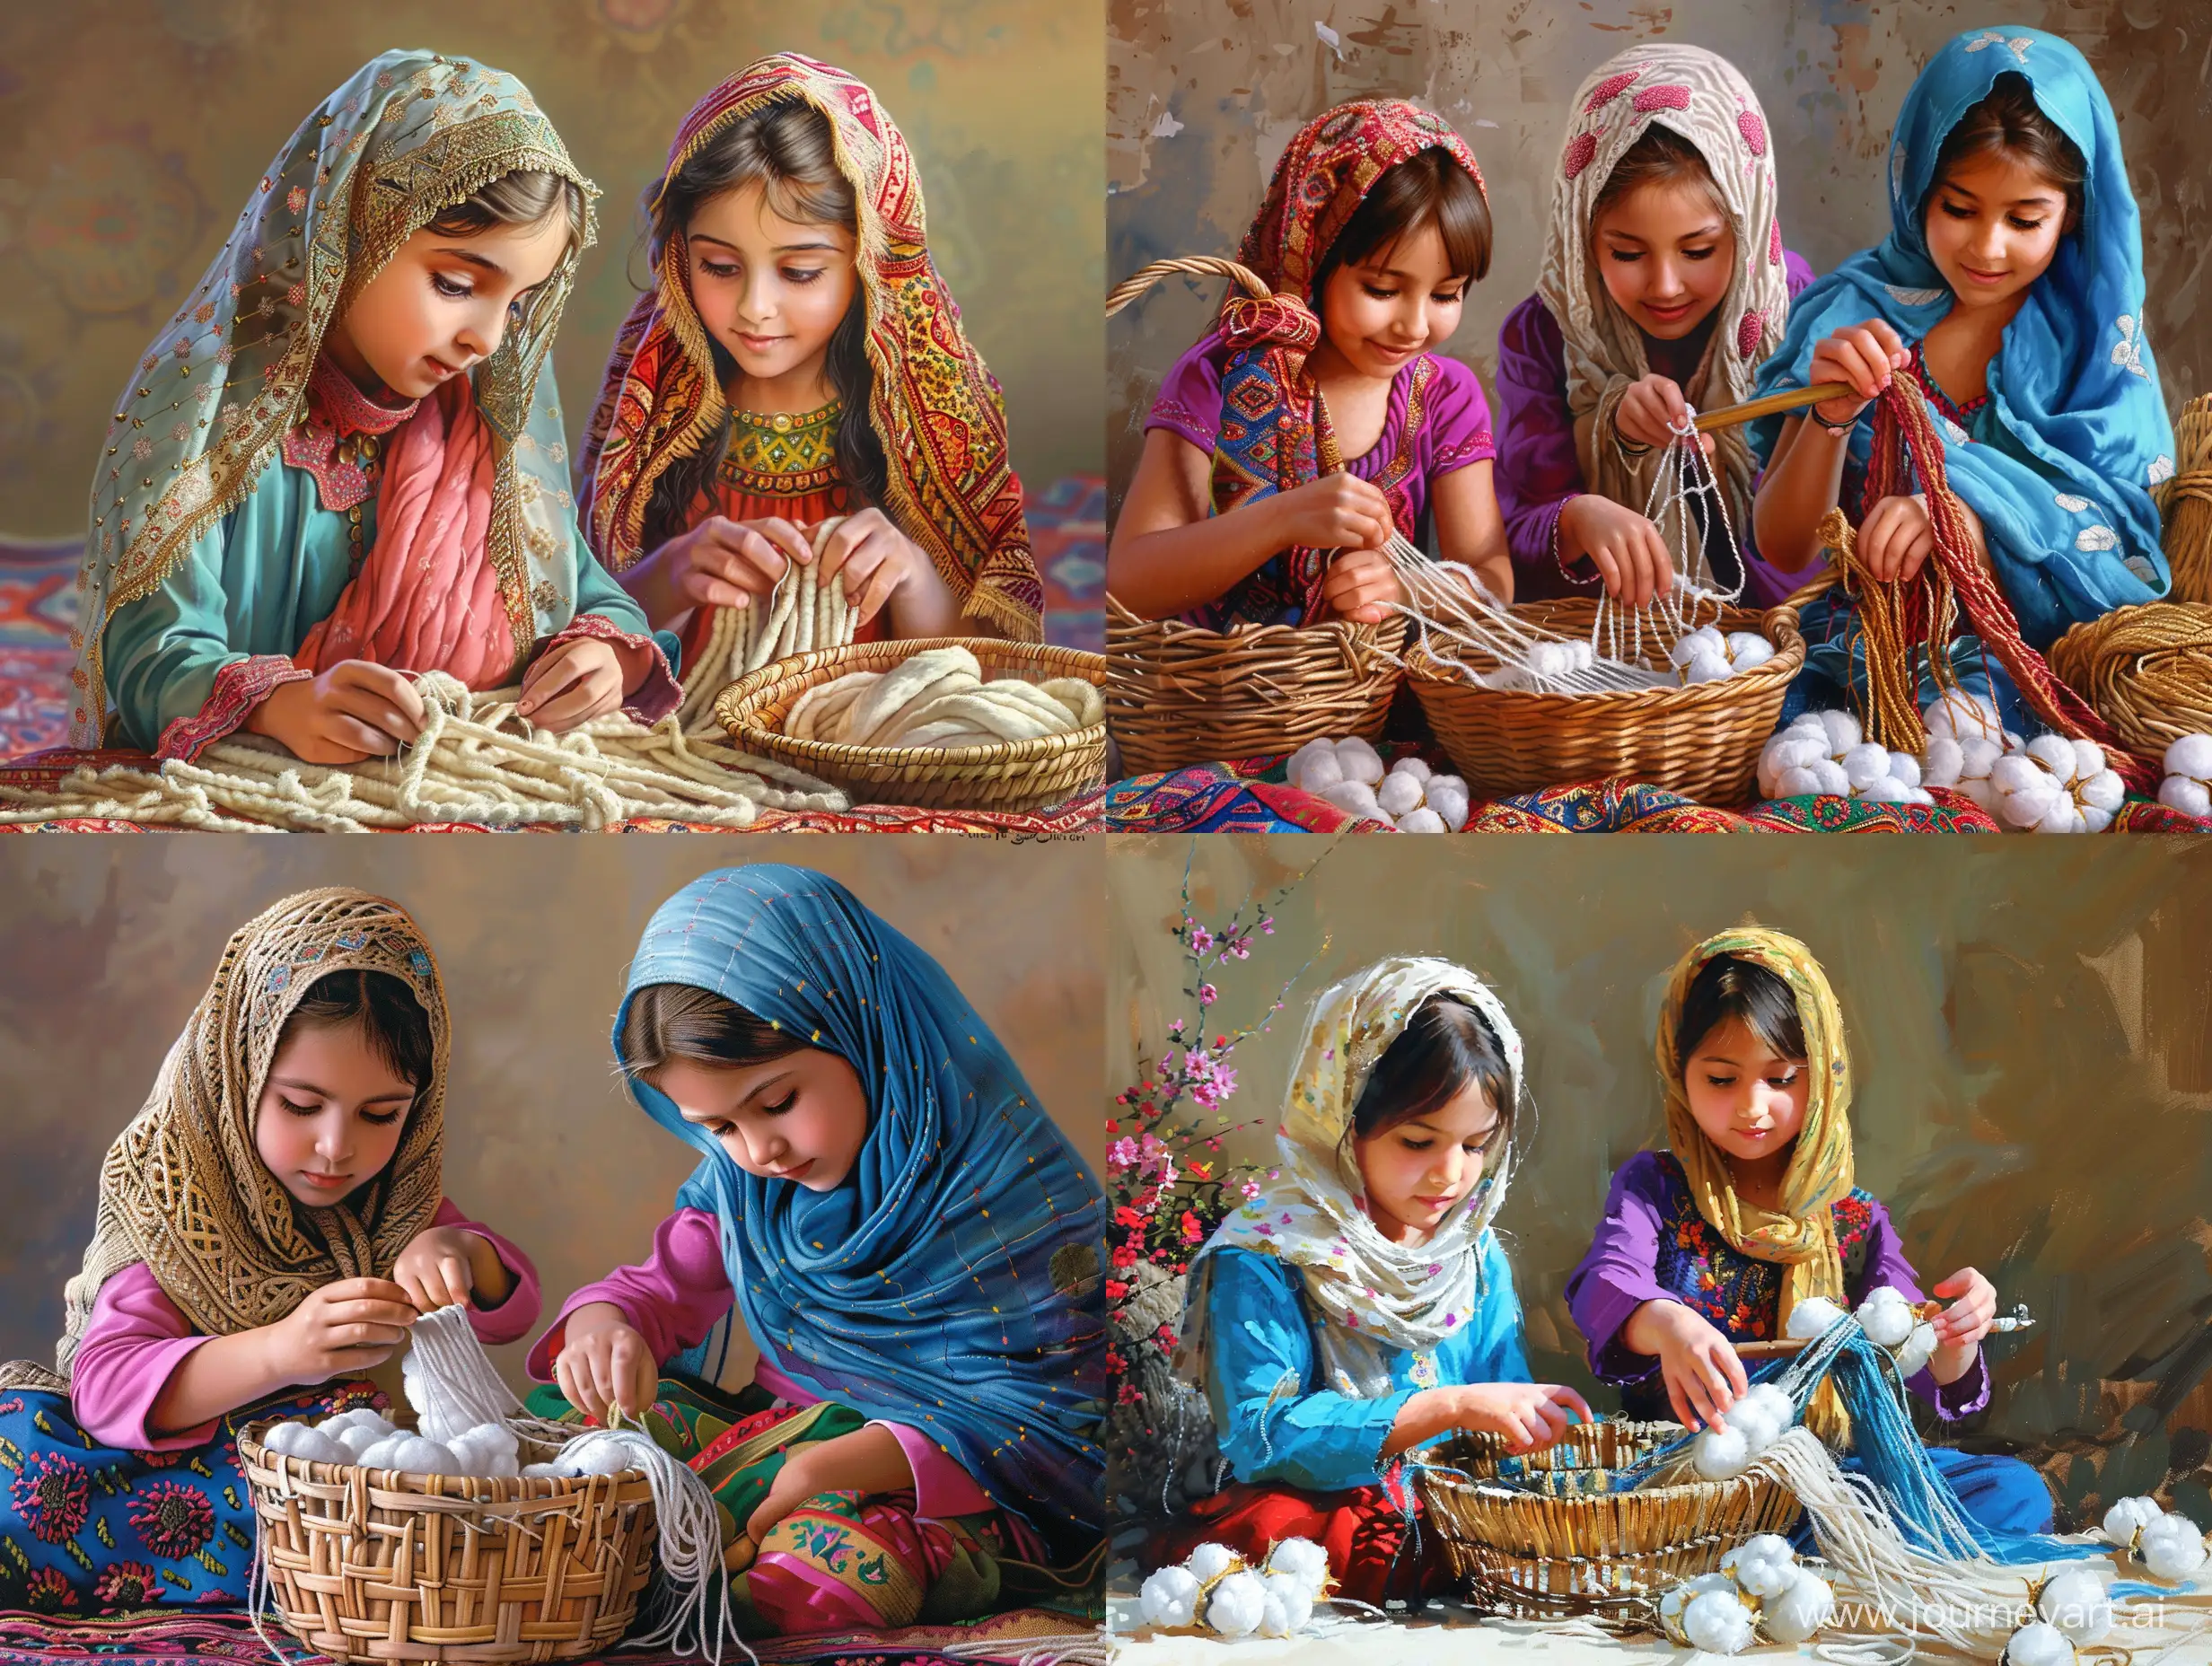 Enthusiastic-Persian-Girls-Weaving-Cotton-Scarves